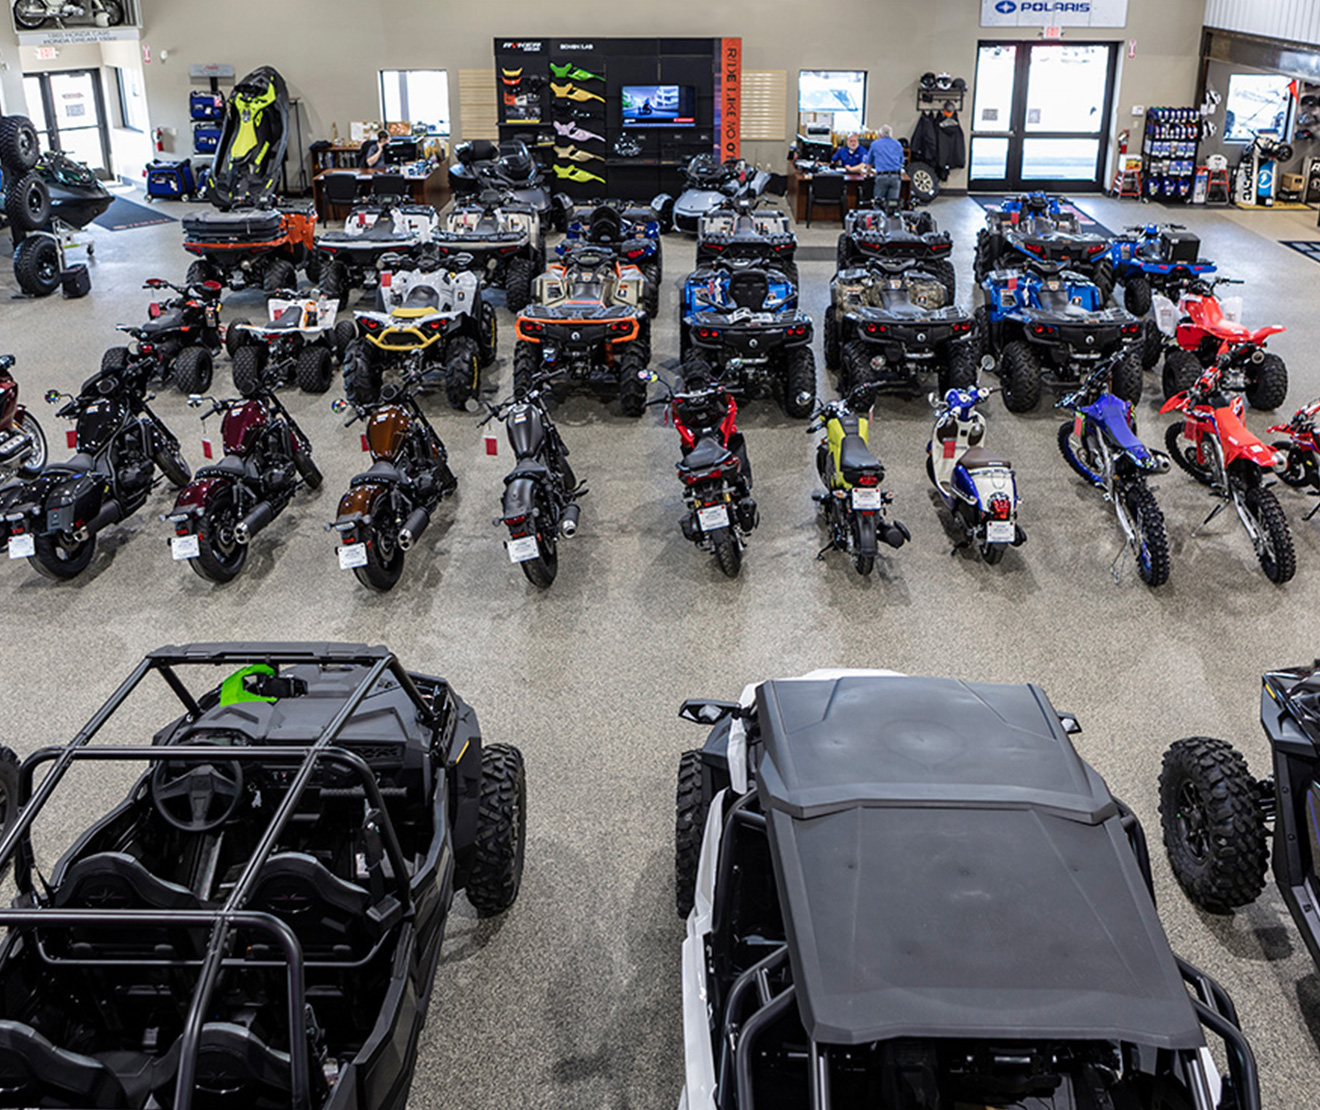 A birds eye view of a powersports showroom